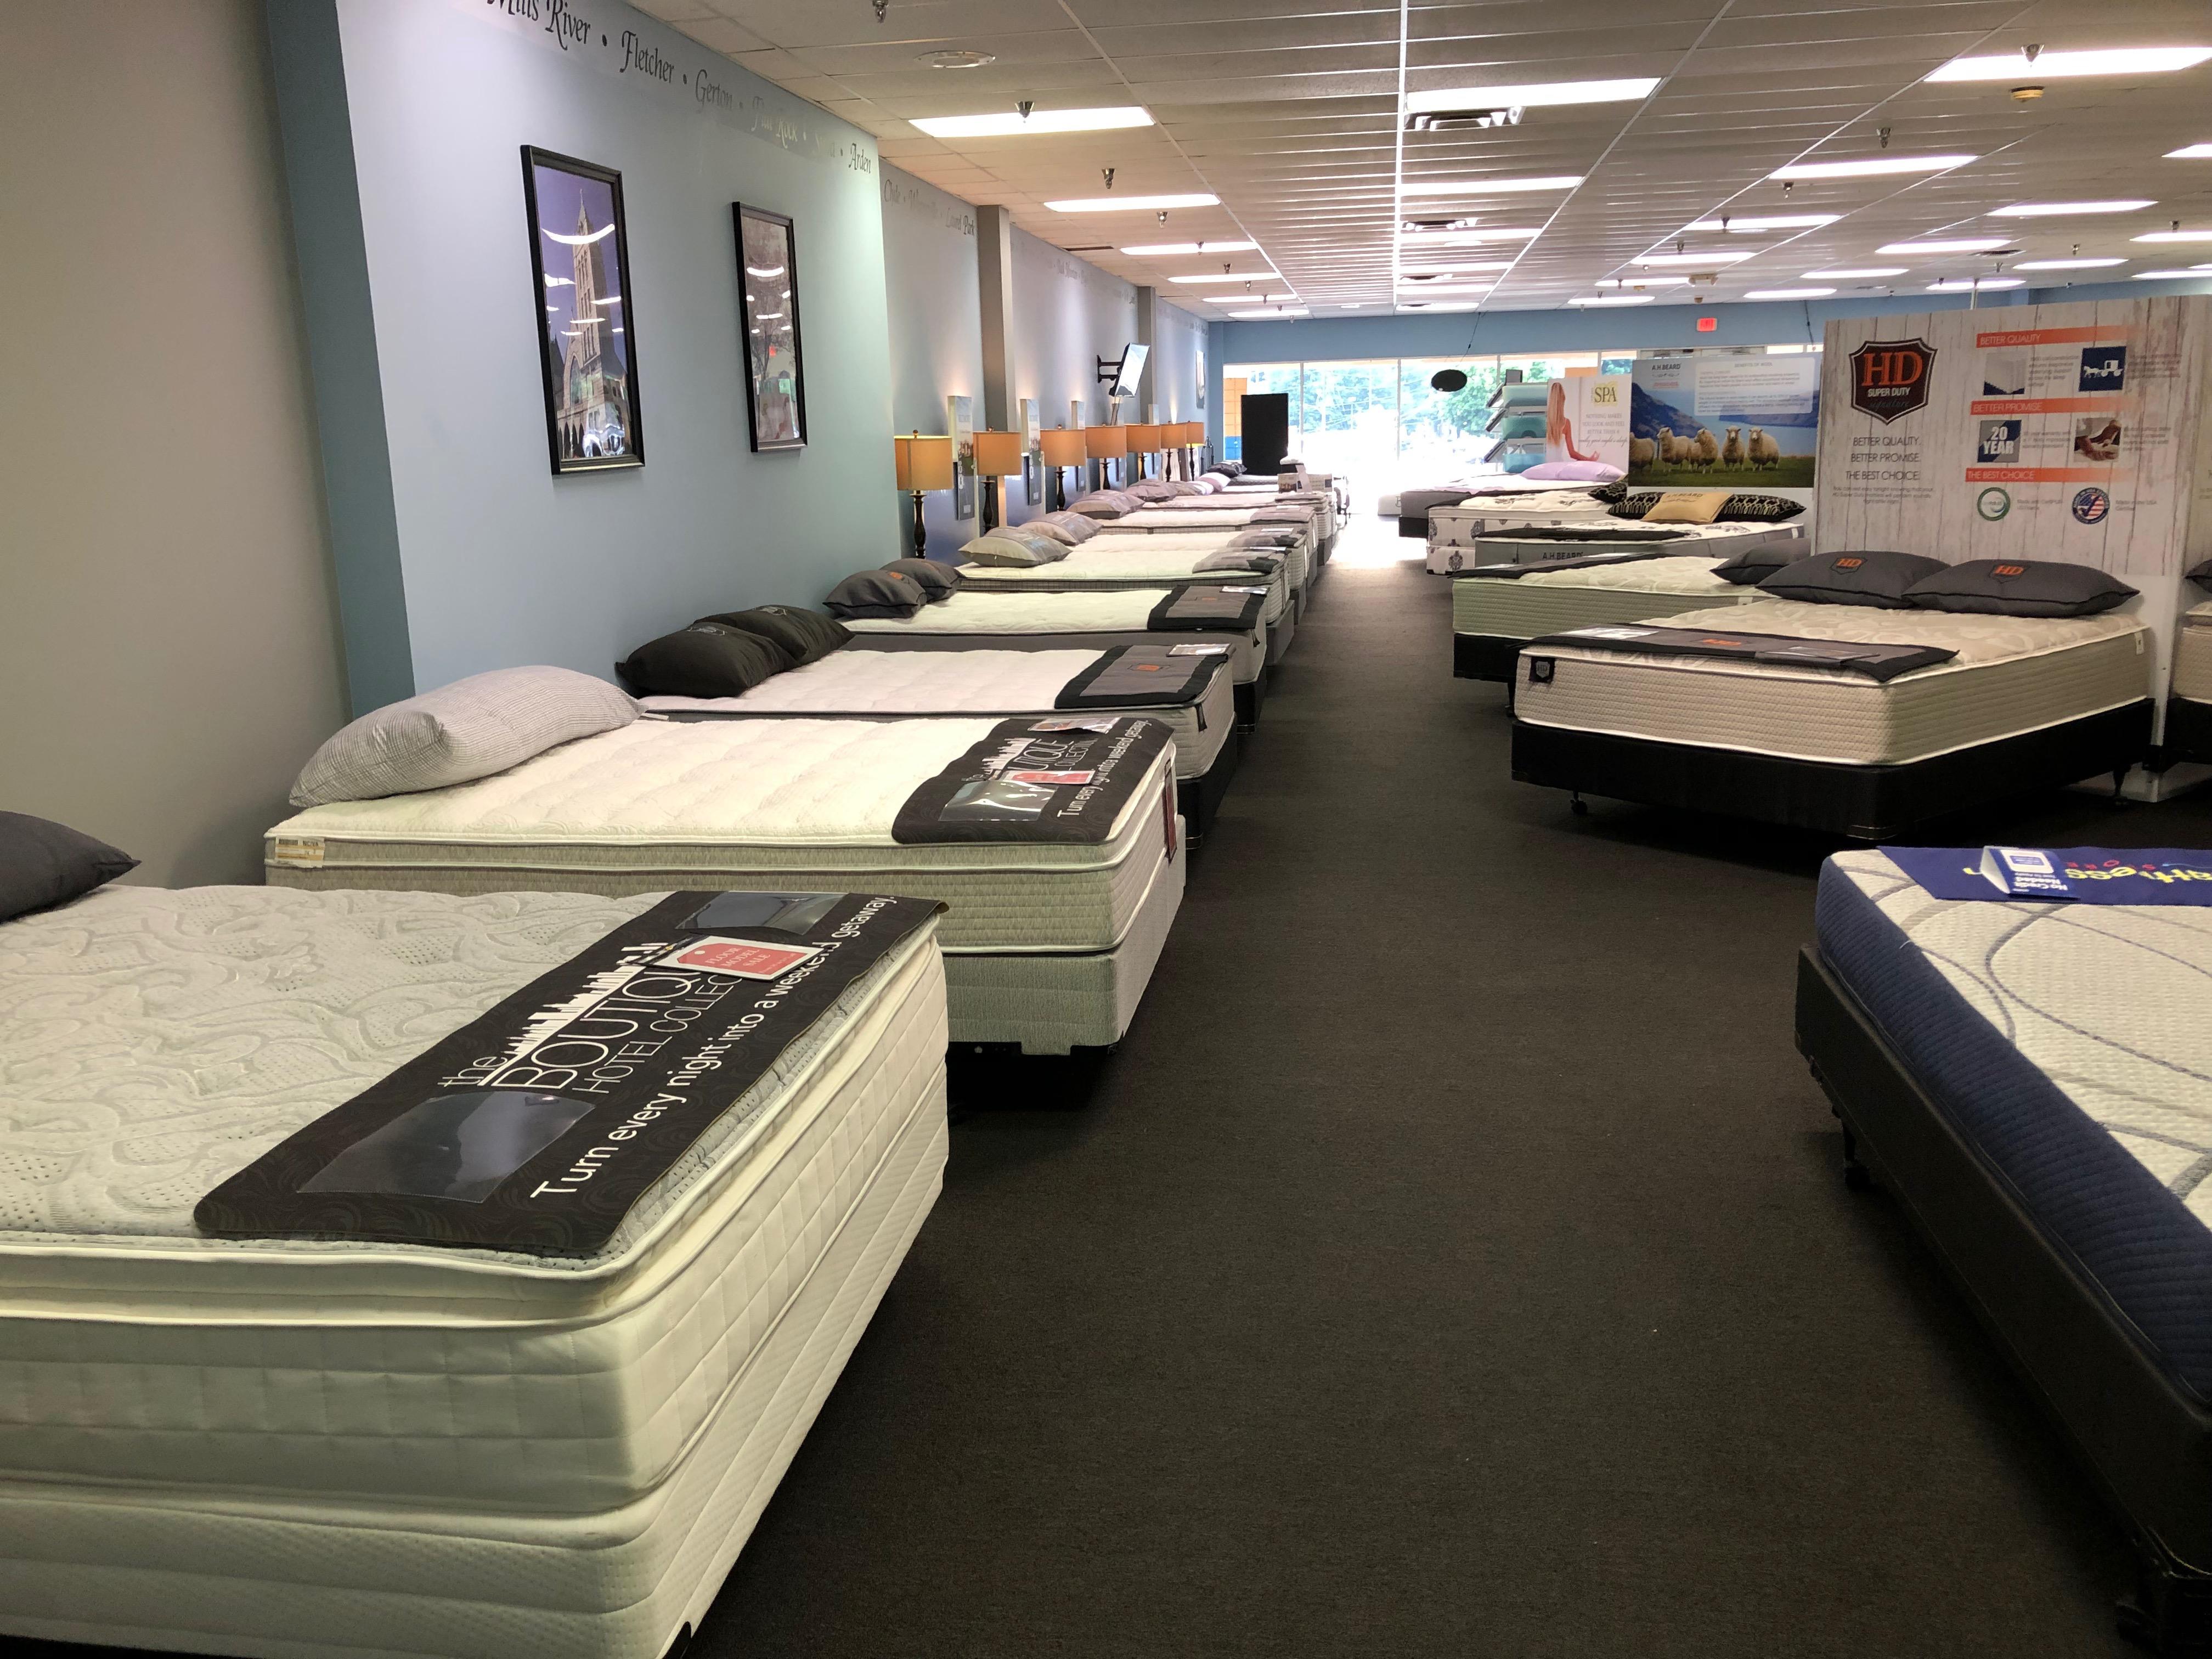 Mattress Man Stores - Clearance Outlet Asheville (828)299-4232